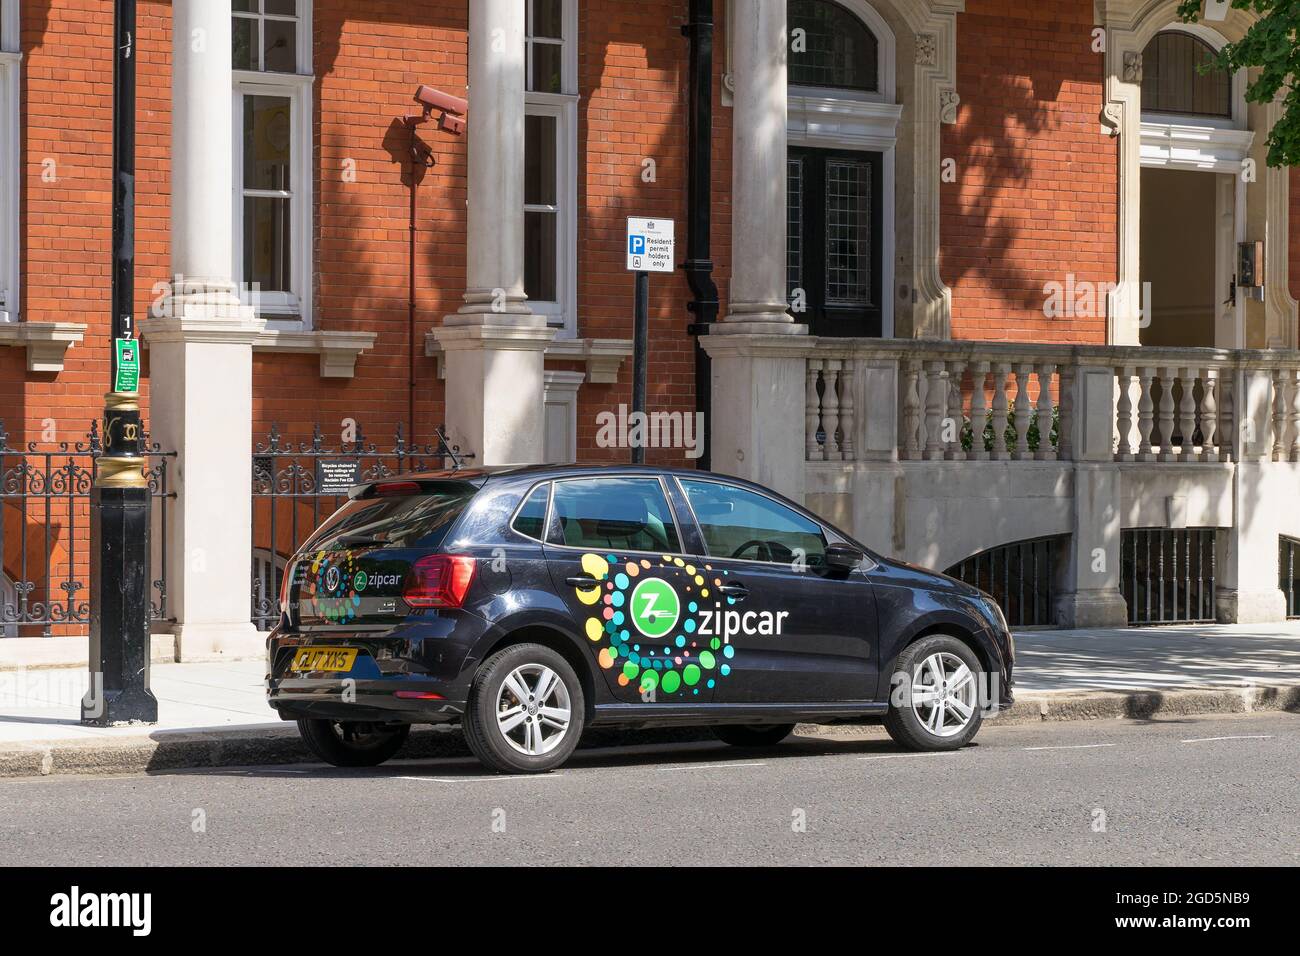 A Zipcar parked at the side of a road in Kensington. A car sharing vehicle with the companies logo on the side. London - 11th August 2021 Stock Photo